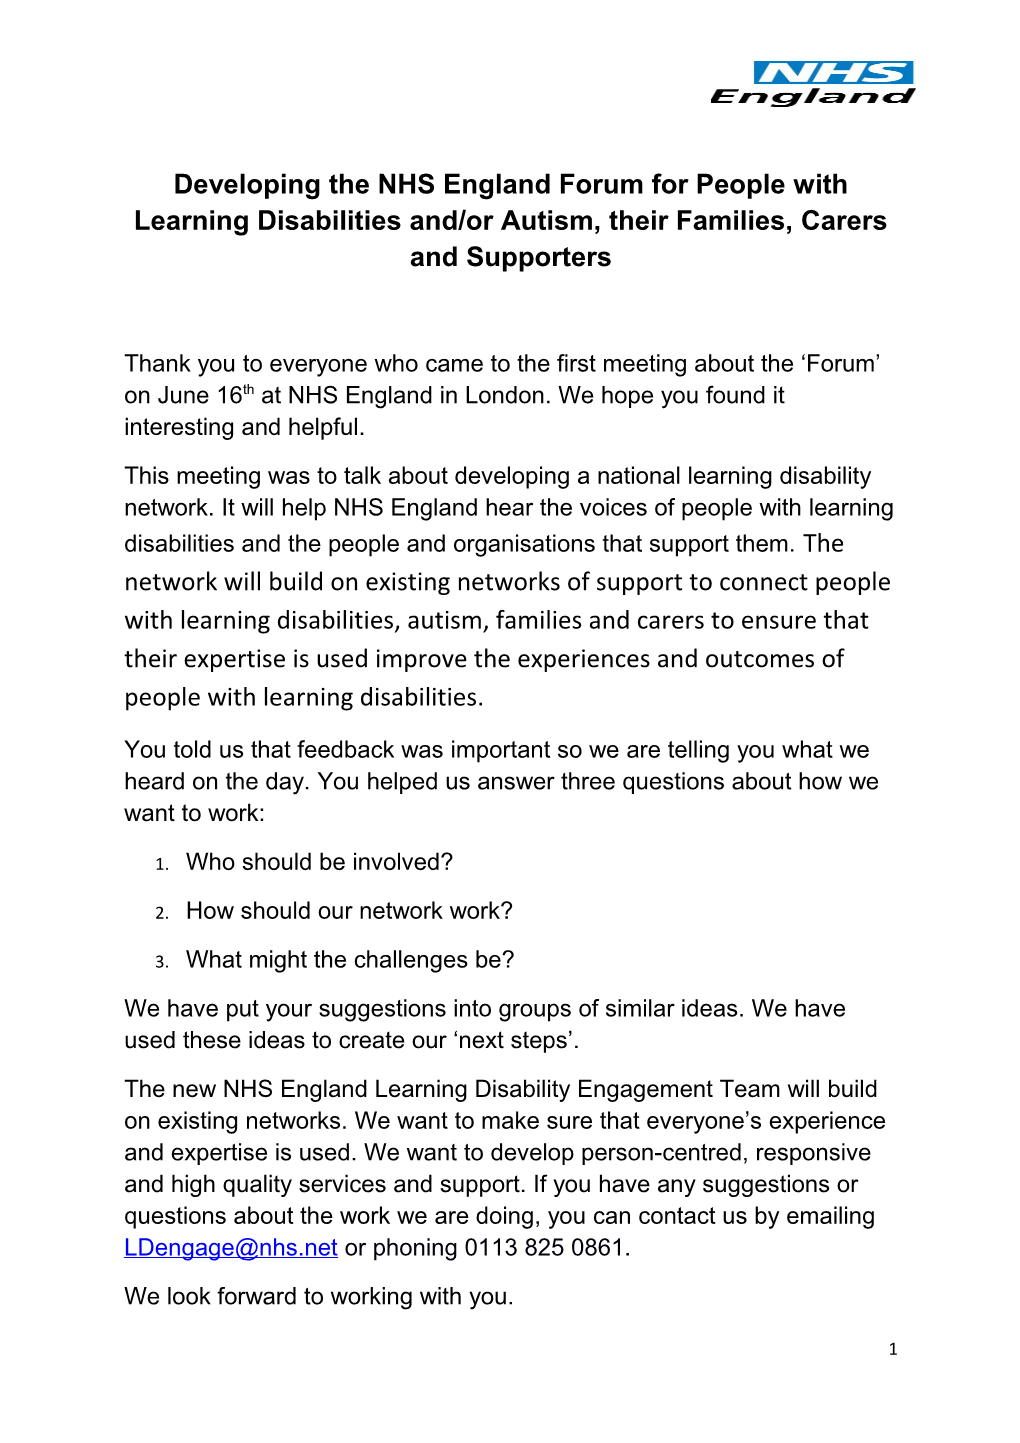 Developing the NHS England Forum for People with Learning Disabilities And/Or Autism